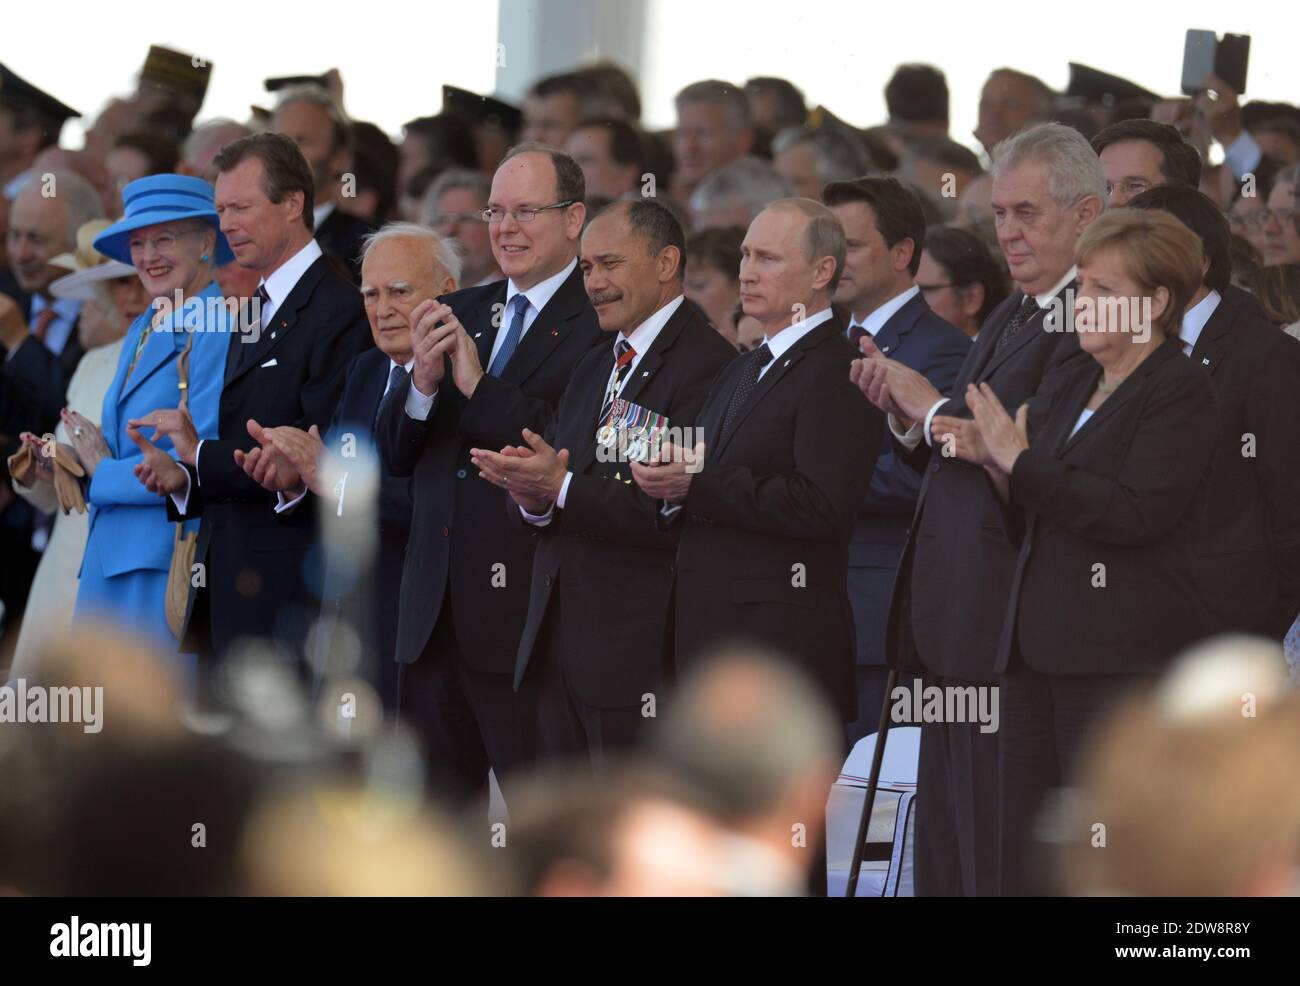 HM the Queen of Denmark, Margrethe II ; HRH The Grand Duke of Luxembourg, Henri ; Karolos Papoulias, President of Greece ; Prince Albert II of Monaco ; Jerry Mateparae, Governor General of New Zealand ; Vladimir Putin, President of Russia ; Milos Zeman, President of the Czech Republic ; Angela Merkel attend the International Ceremony at Sword Beach in Ouistreham, as part of the official ceremonies on the occasion of the D-Day 70th Anniversary, on June 6, 2014 in Normandy, France. Photo by Abd Rabbo-Bernard-Gouhier-Mousse/ABACAPRESS.COM Stock Photo